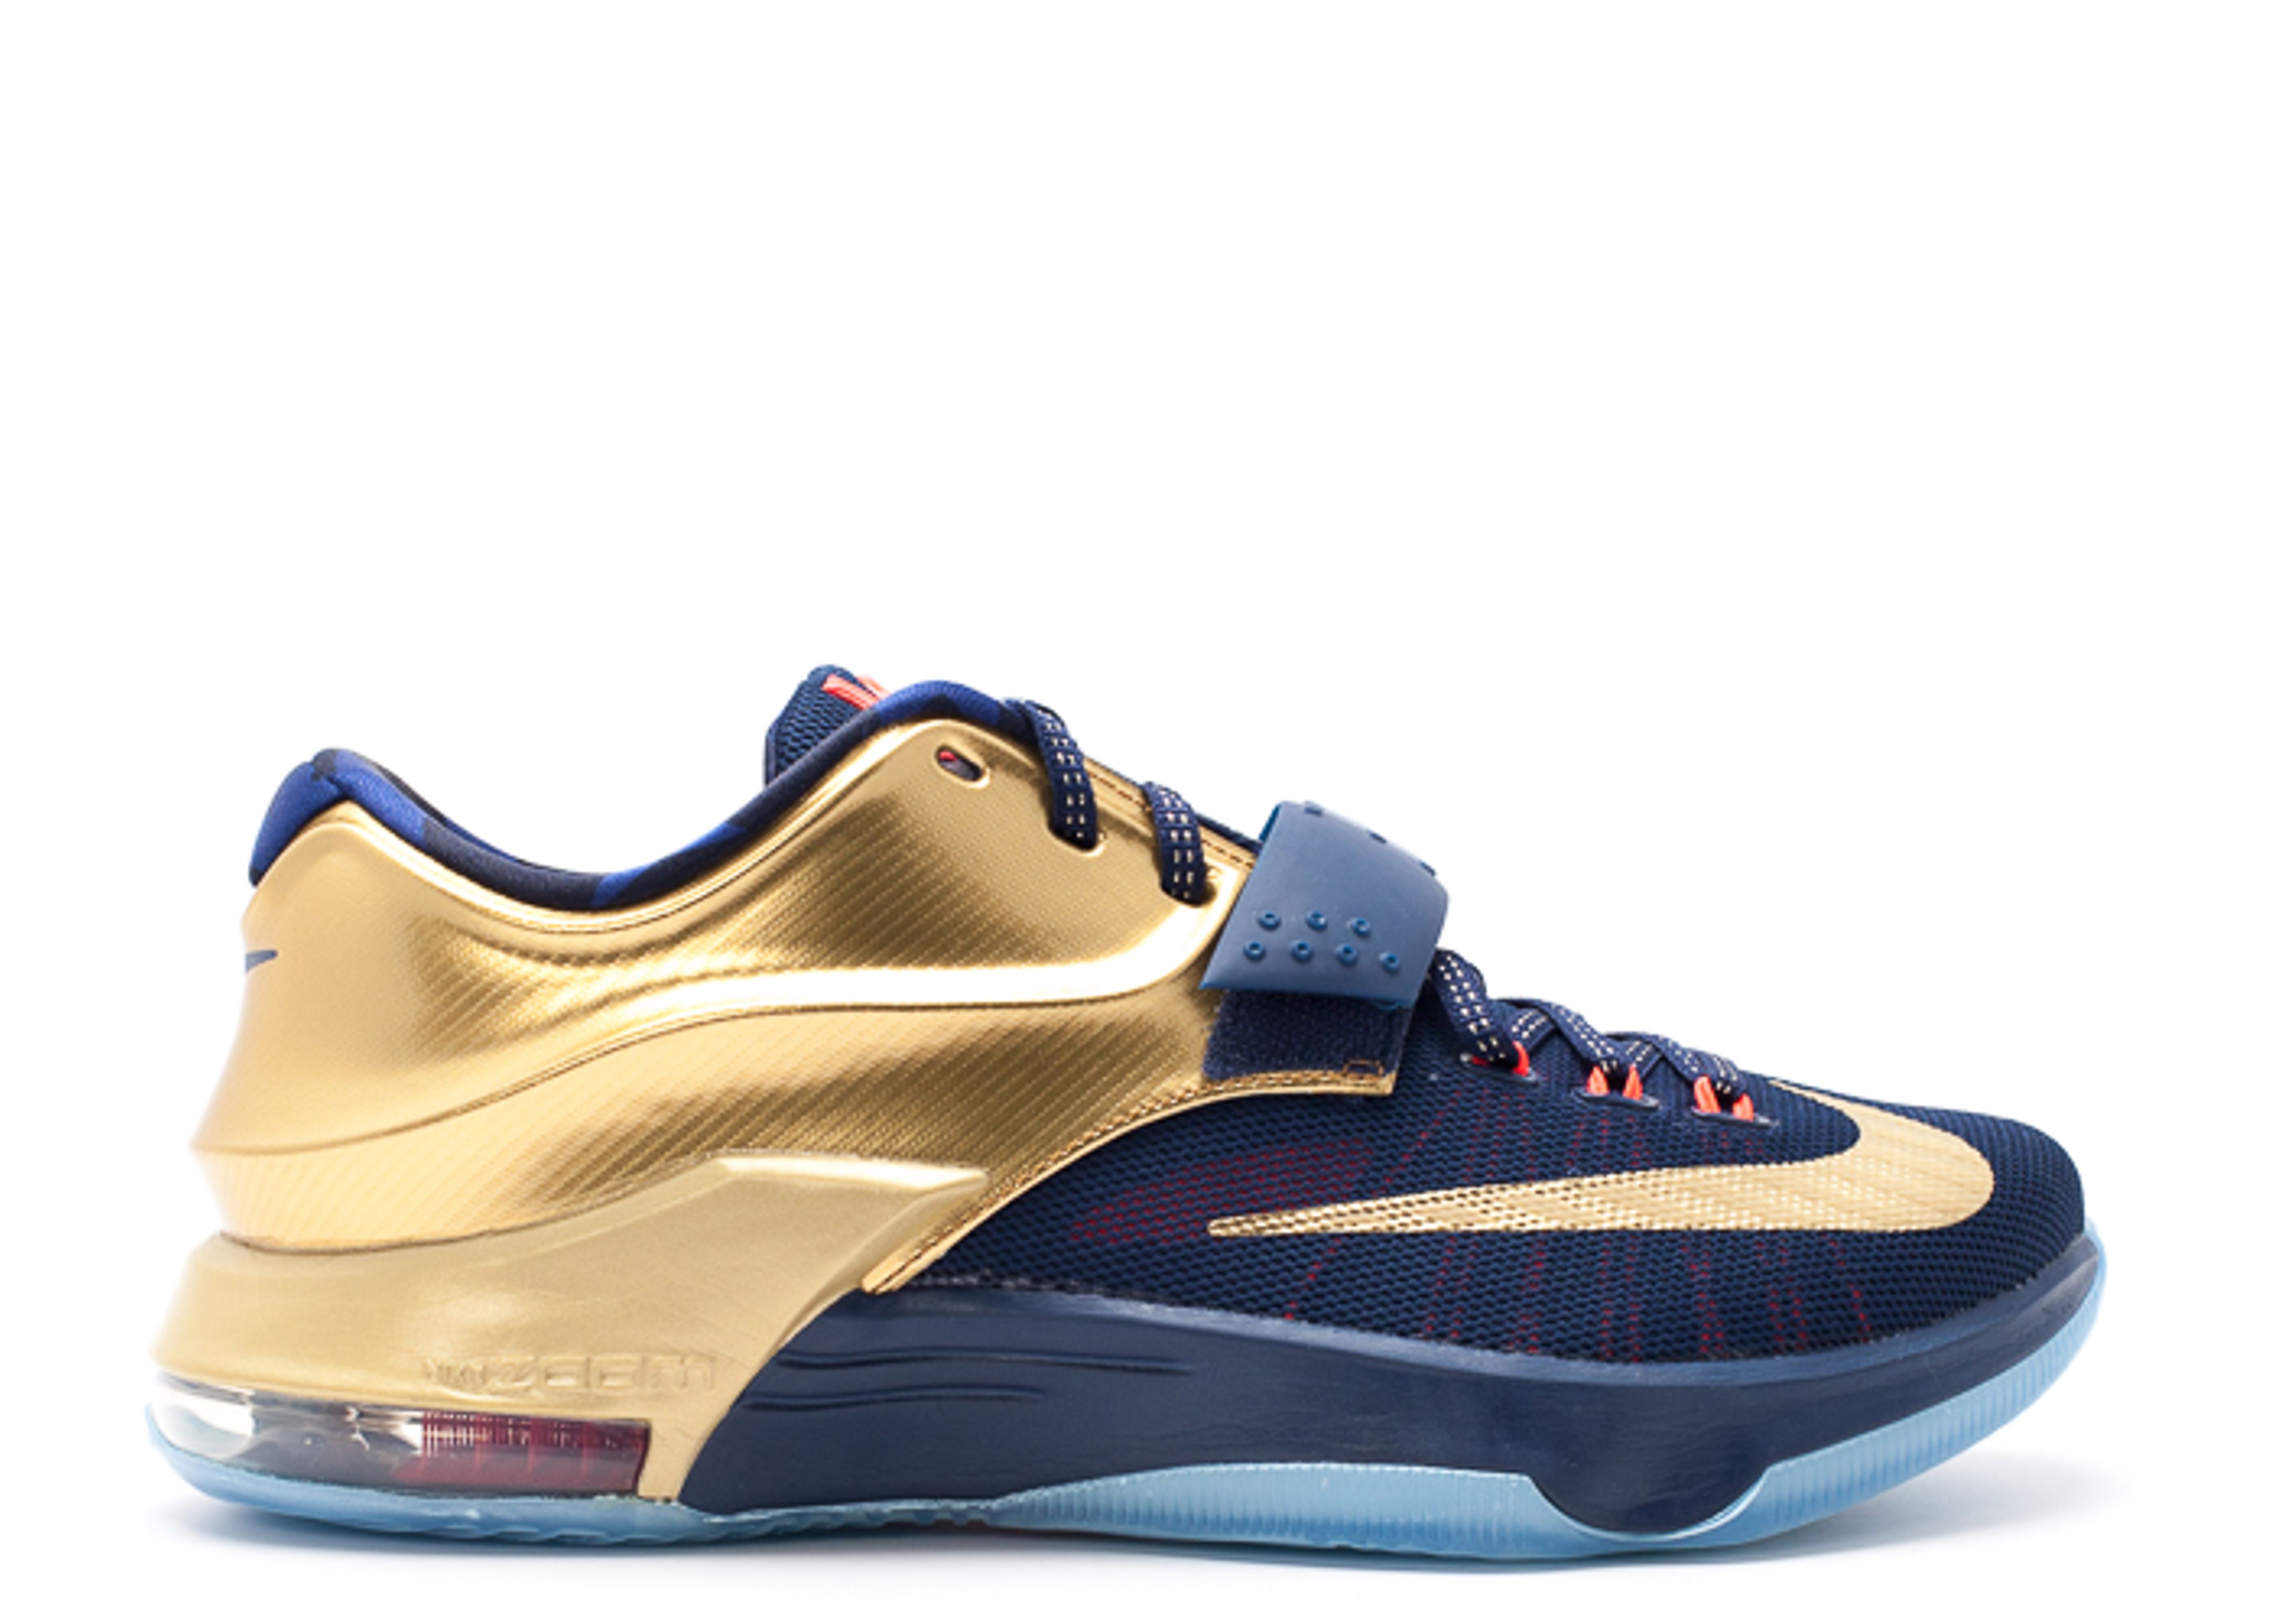 kd 7 white and gold